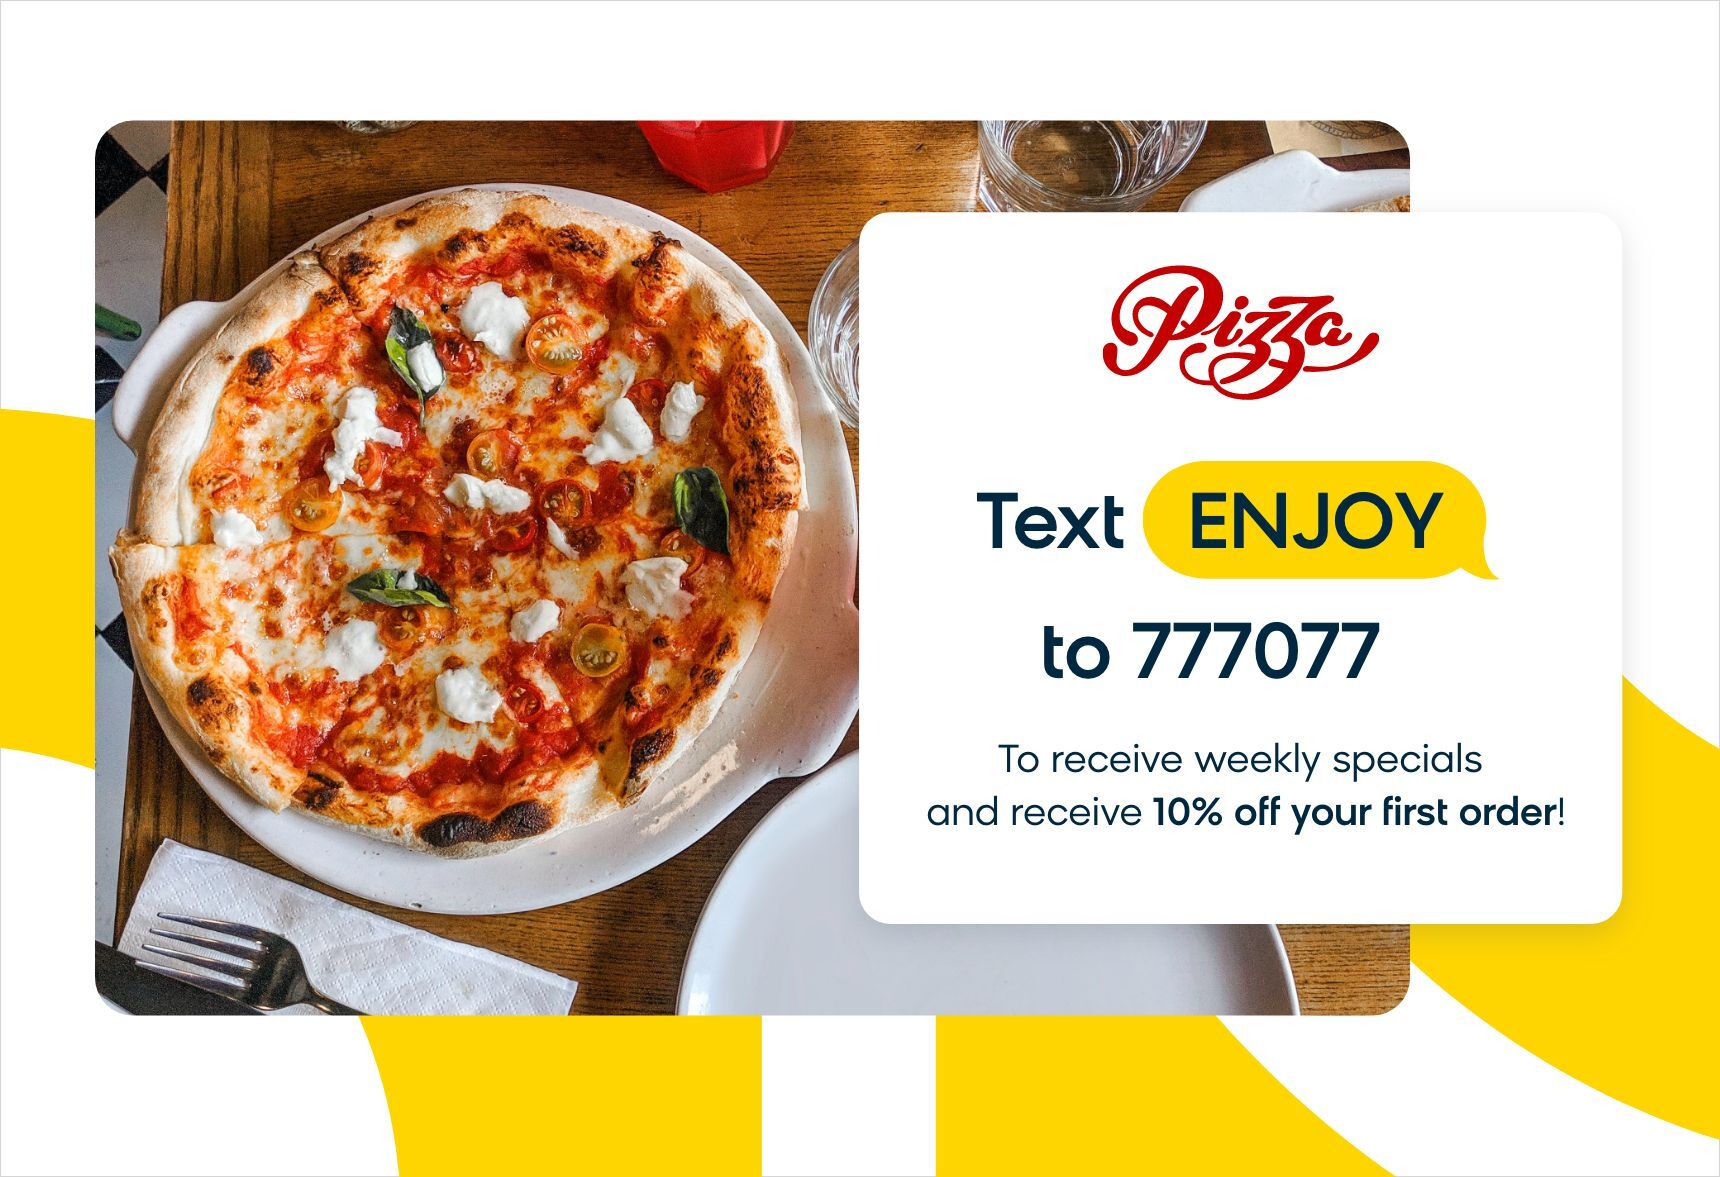 An SMS short code marketing message for a pizza restaurant invite customers to text a short code for discounts.